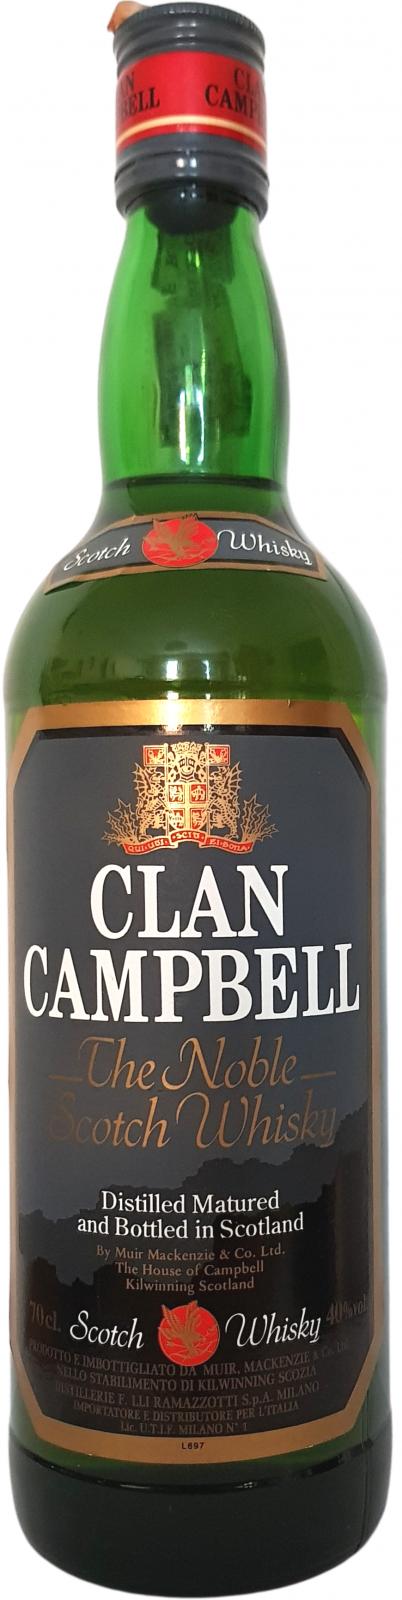 Clan Campbell The Noble Limited Edition Scotch Whisky buy online